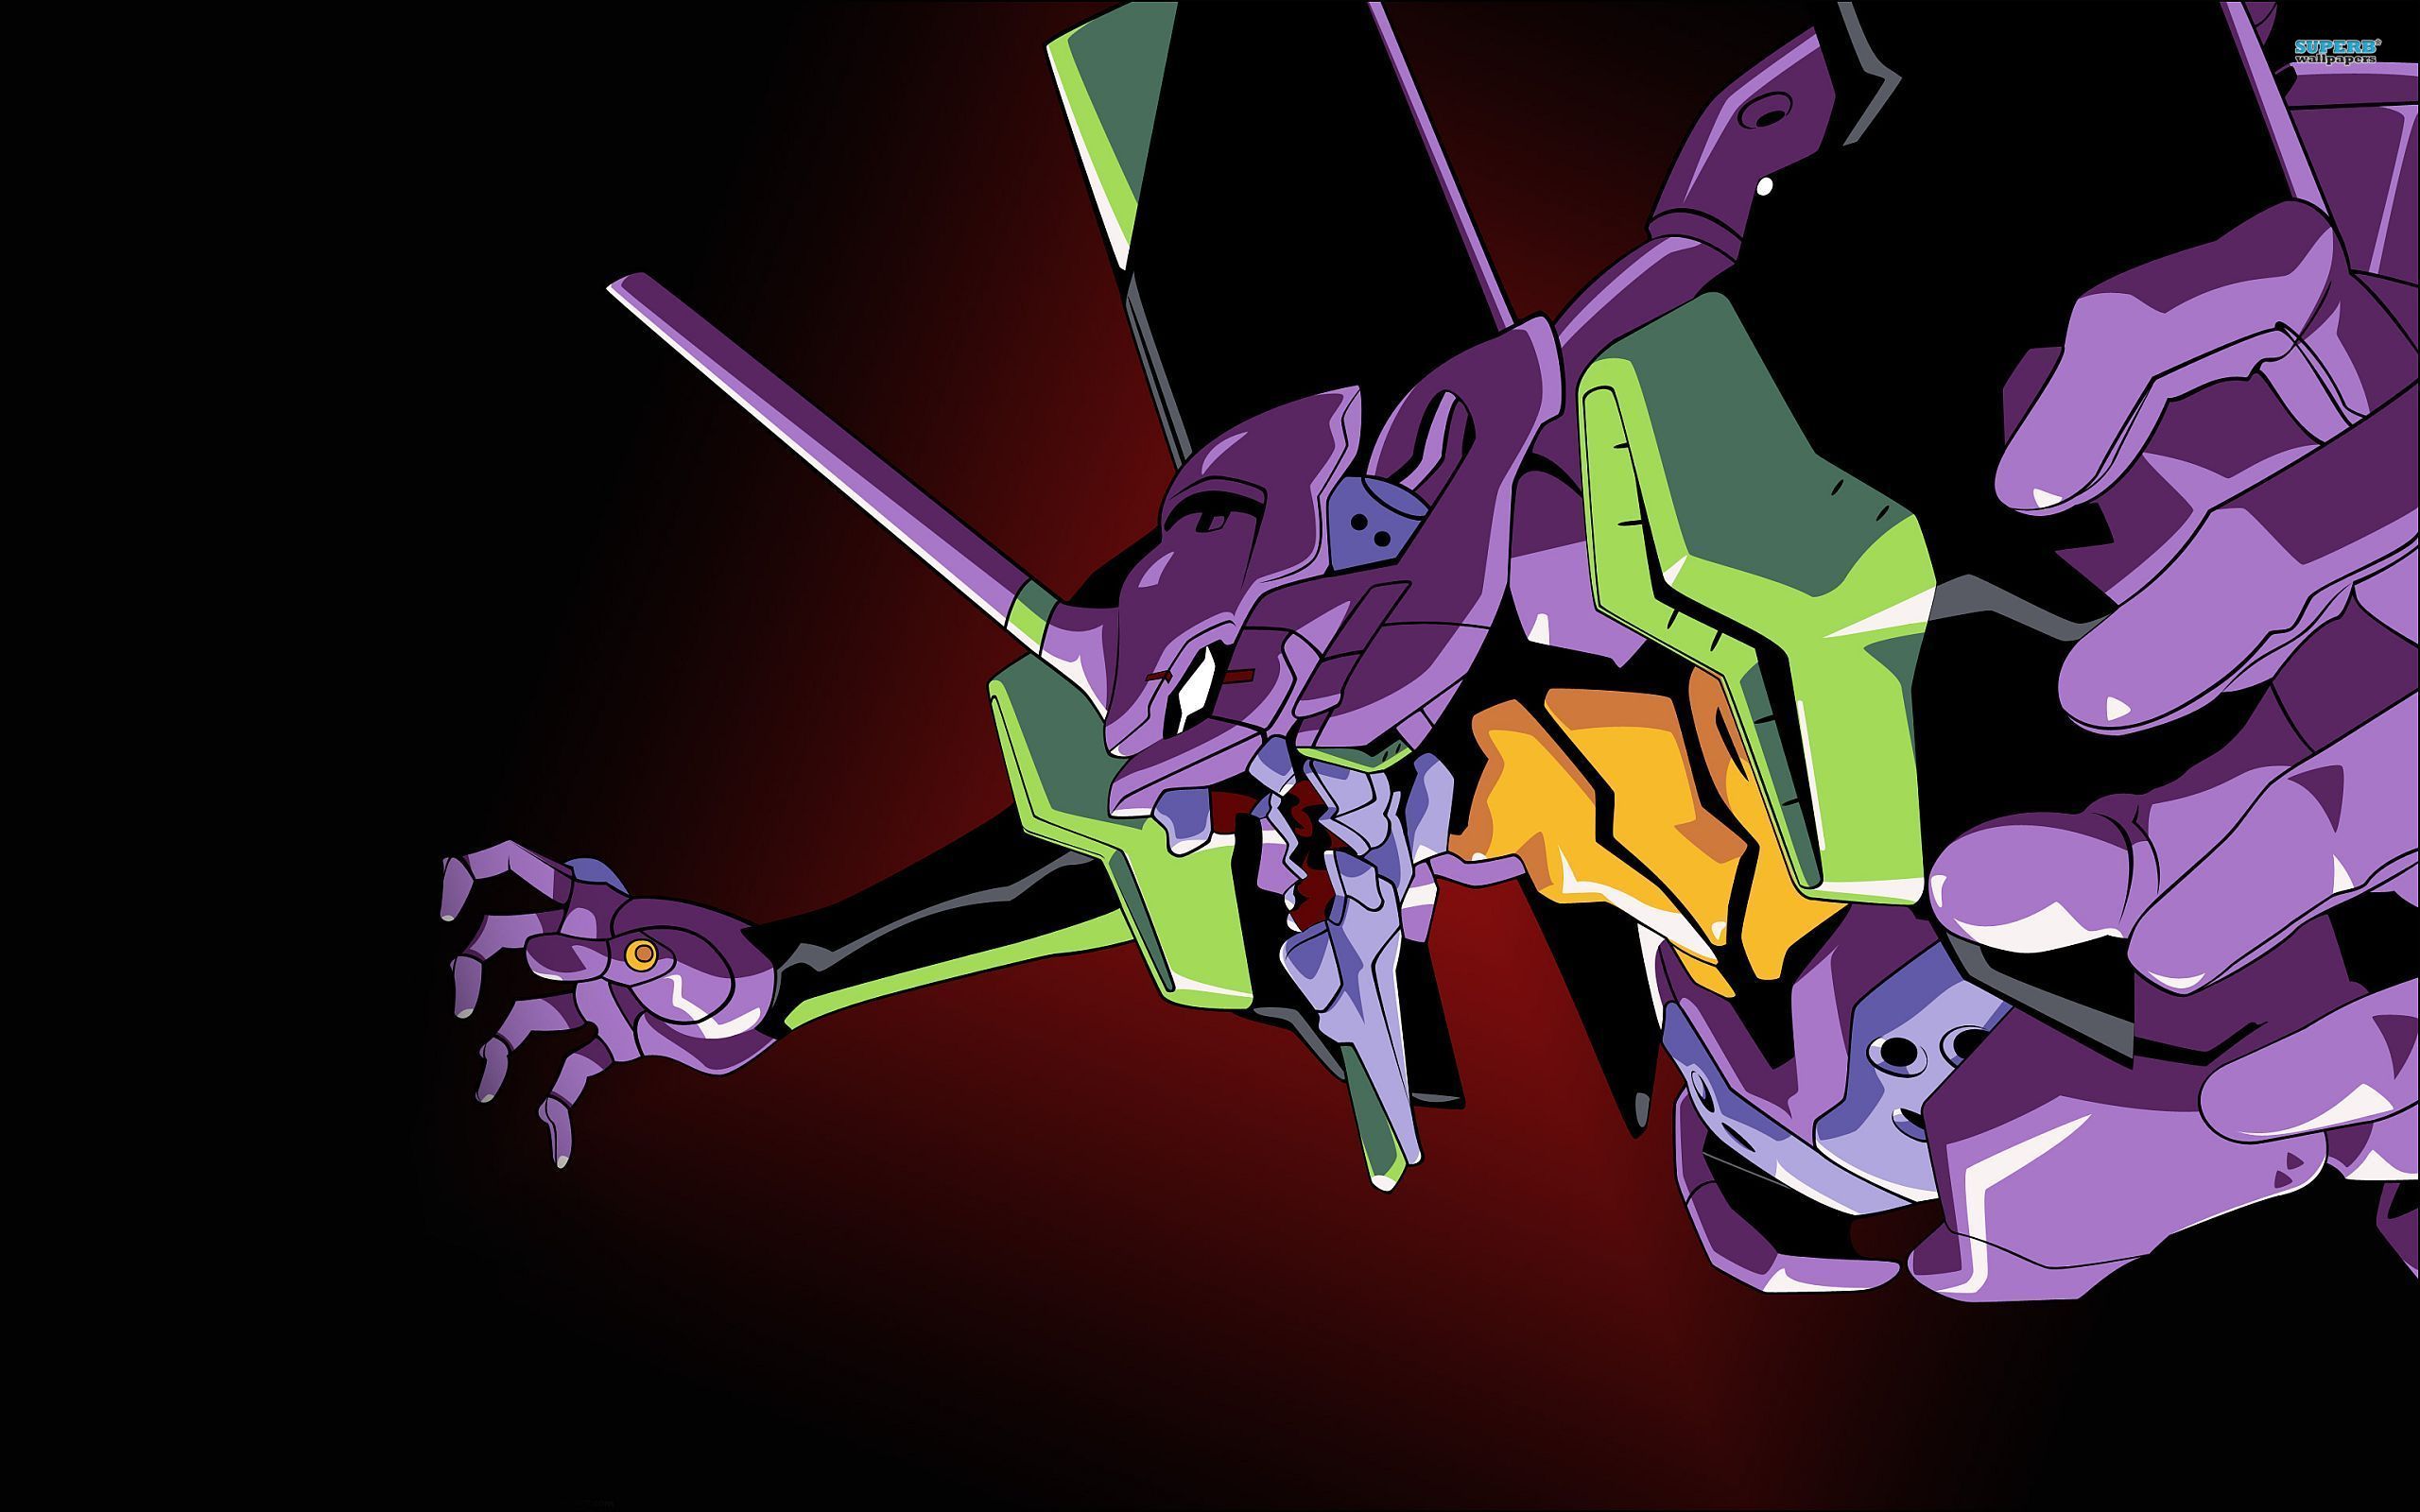 How Well Do You Know Neon Genesis Evangelion?